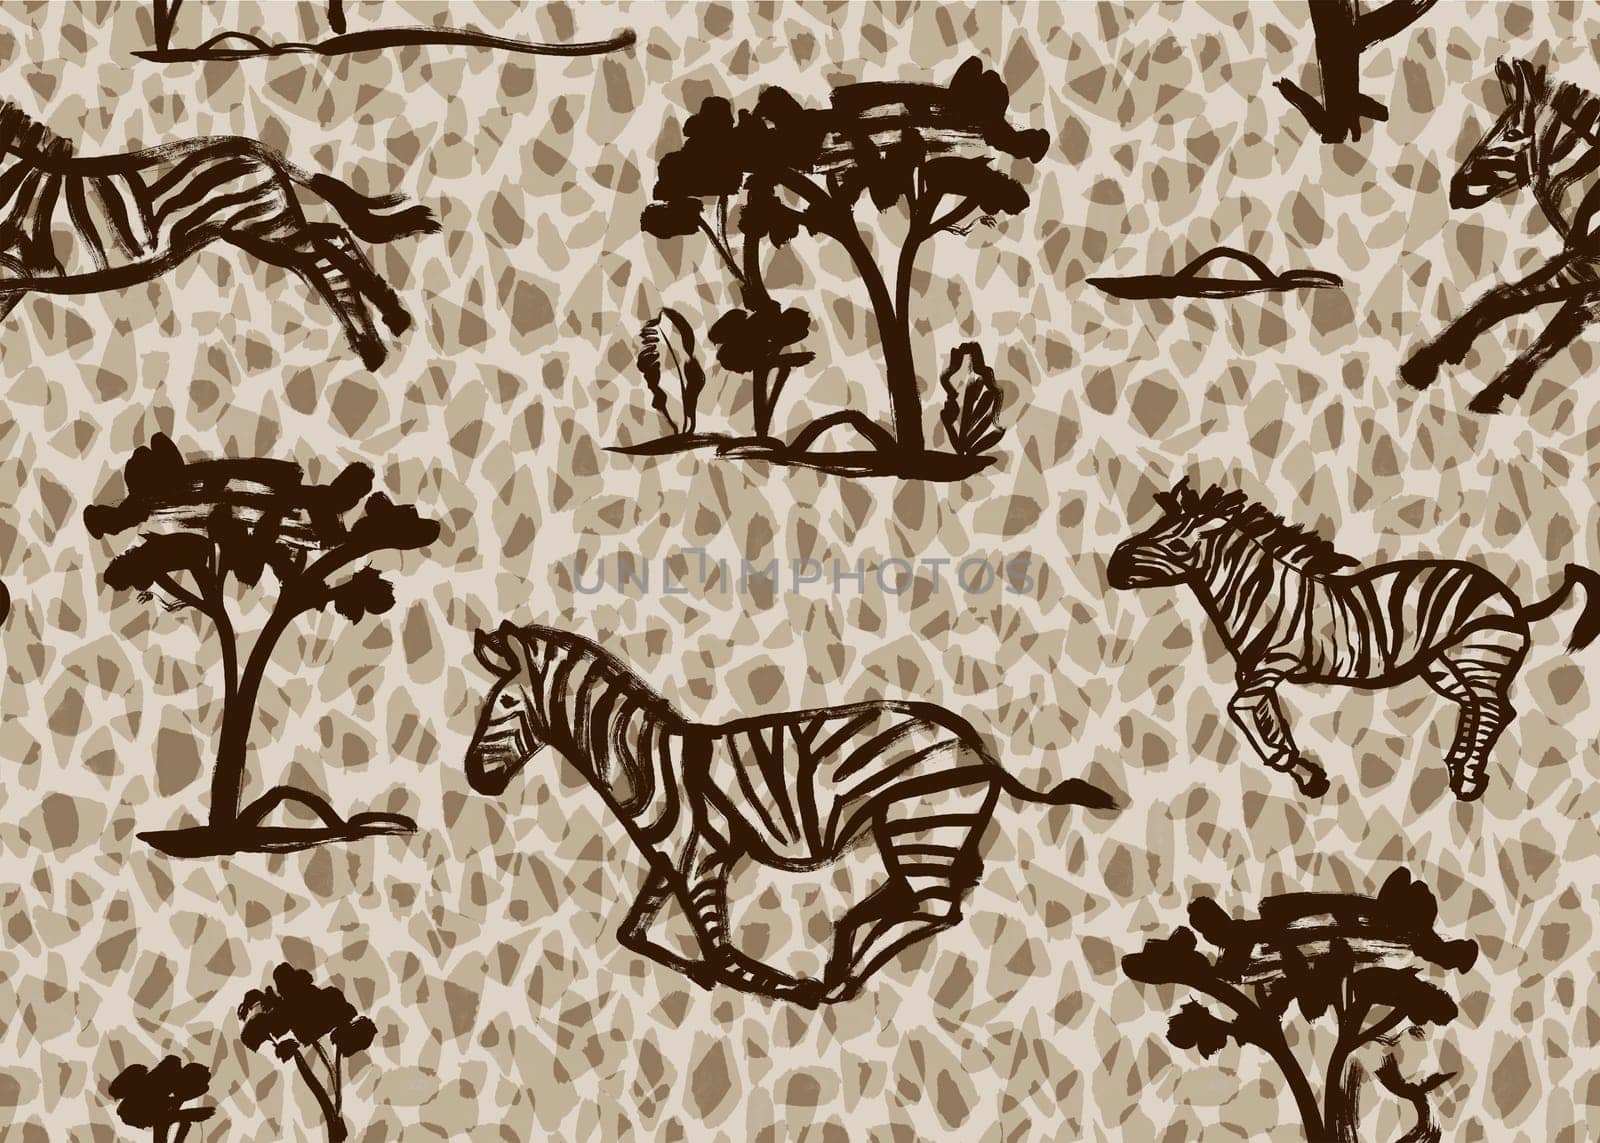 Abstract pattern with running zebras on the savannah painted by MarinaVoyush